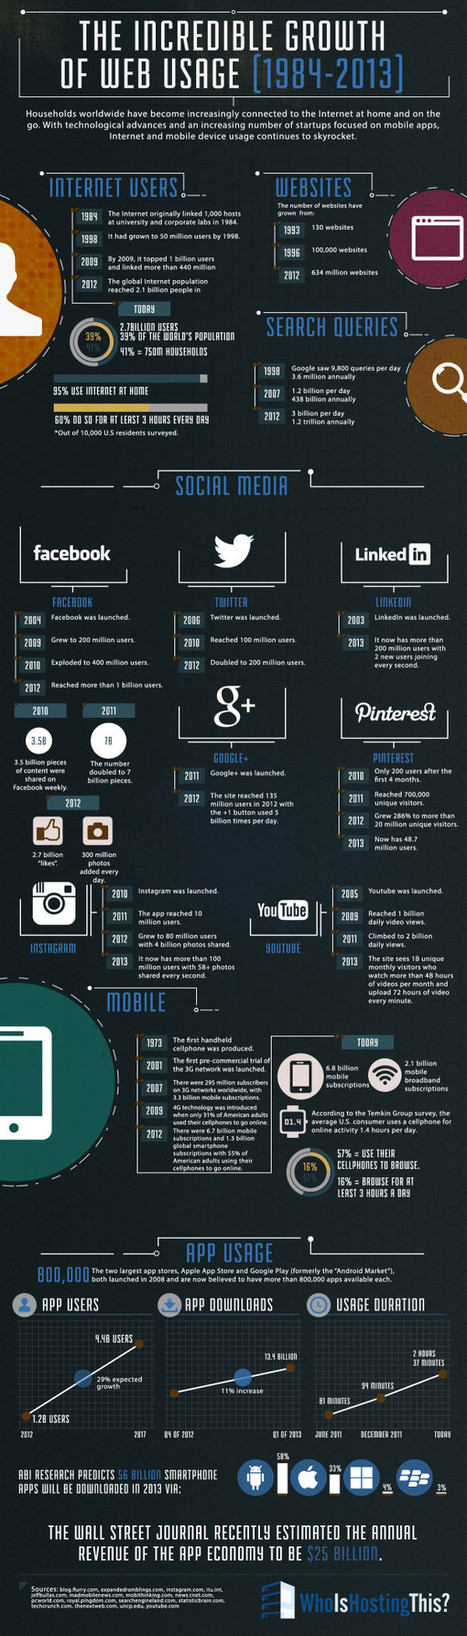 Internet and technology: A history of growth (1984-2013) | e-commerce & social media | Scoop.it